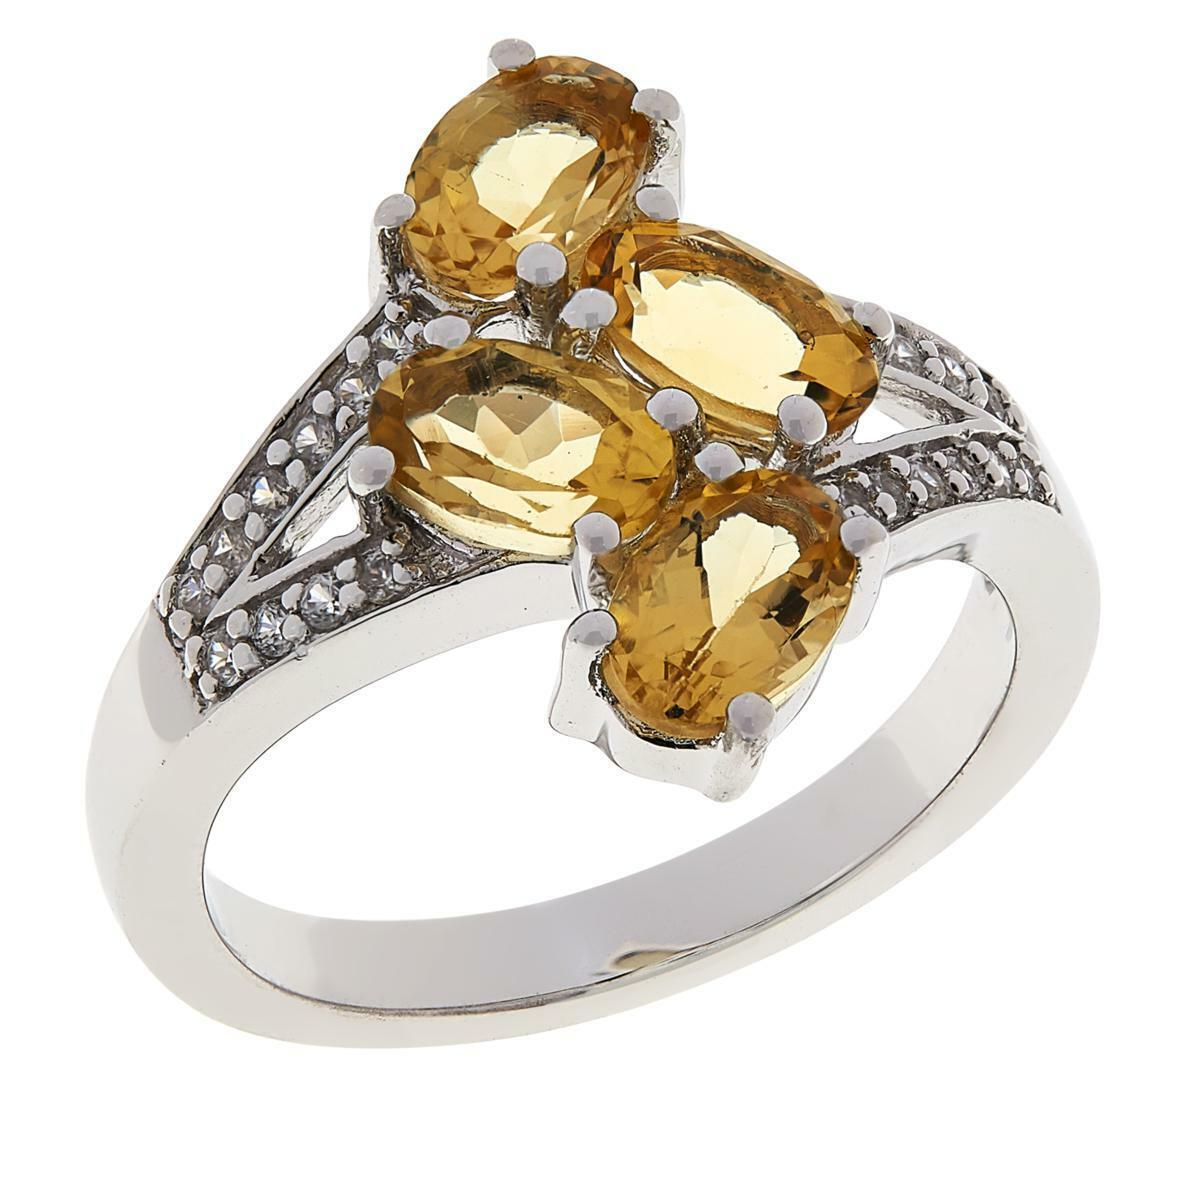 Colleen Lopez Sterling Silver Citrine & White Zircon Bypass Ring, Size 6